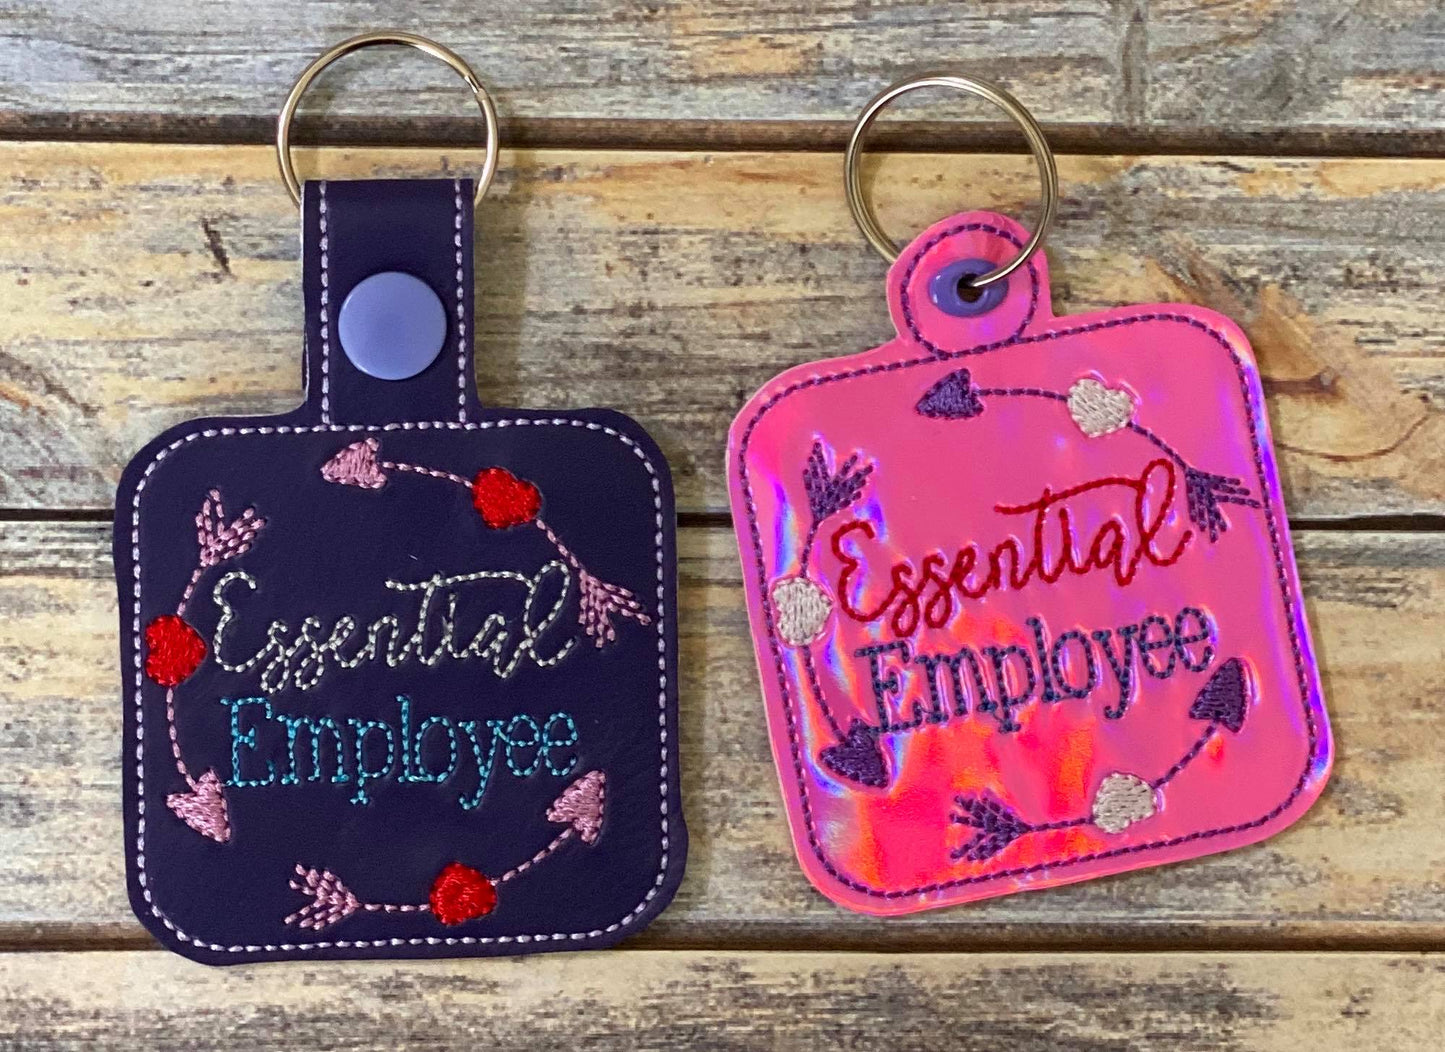 Essential Employee Tab and eyelet Fobs 4x4 and 5x7 included- DIGITAL Embroidery DESIGN